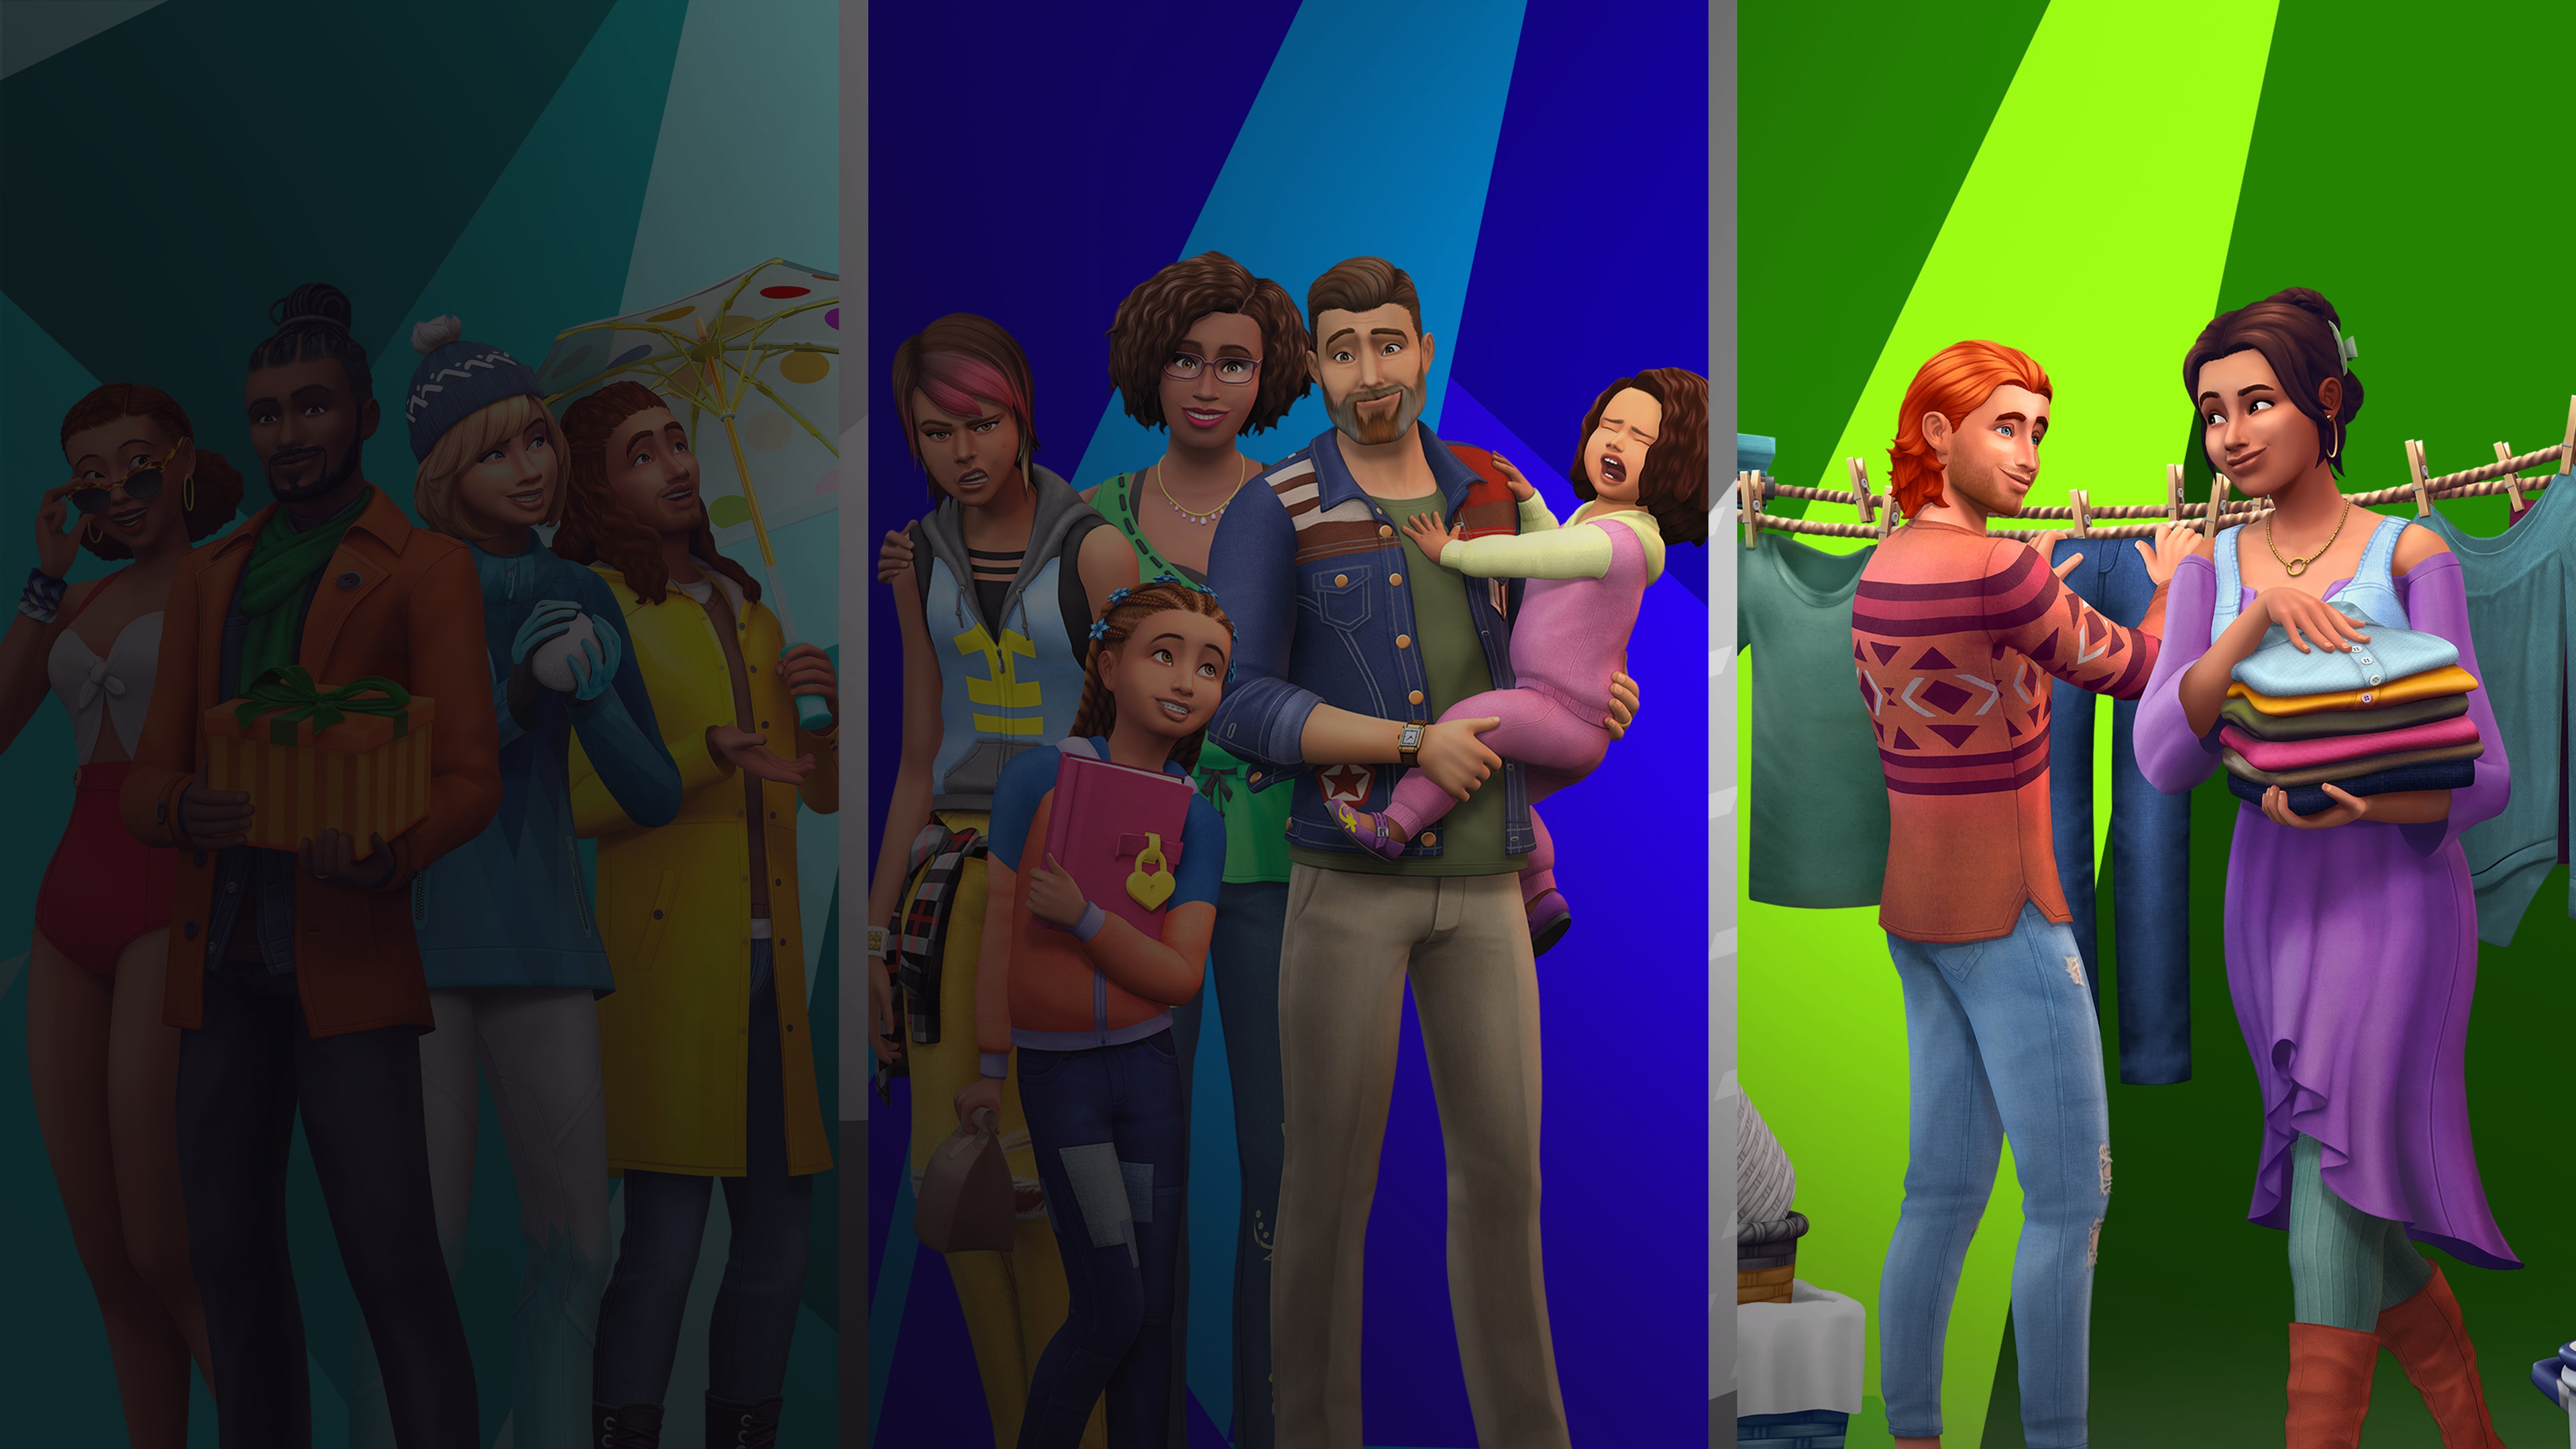 The Sims™ 4 Everyday Sims Bundle